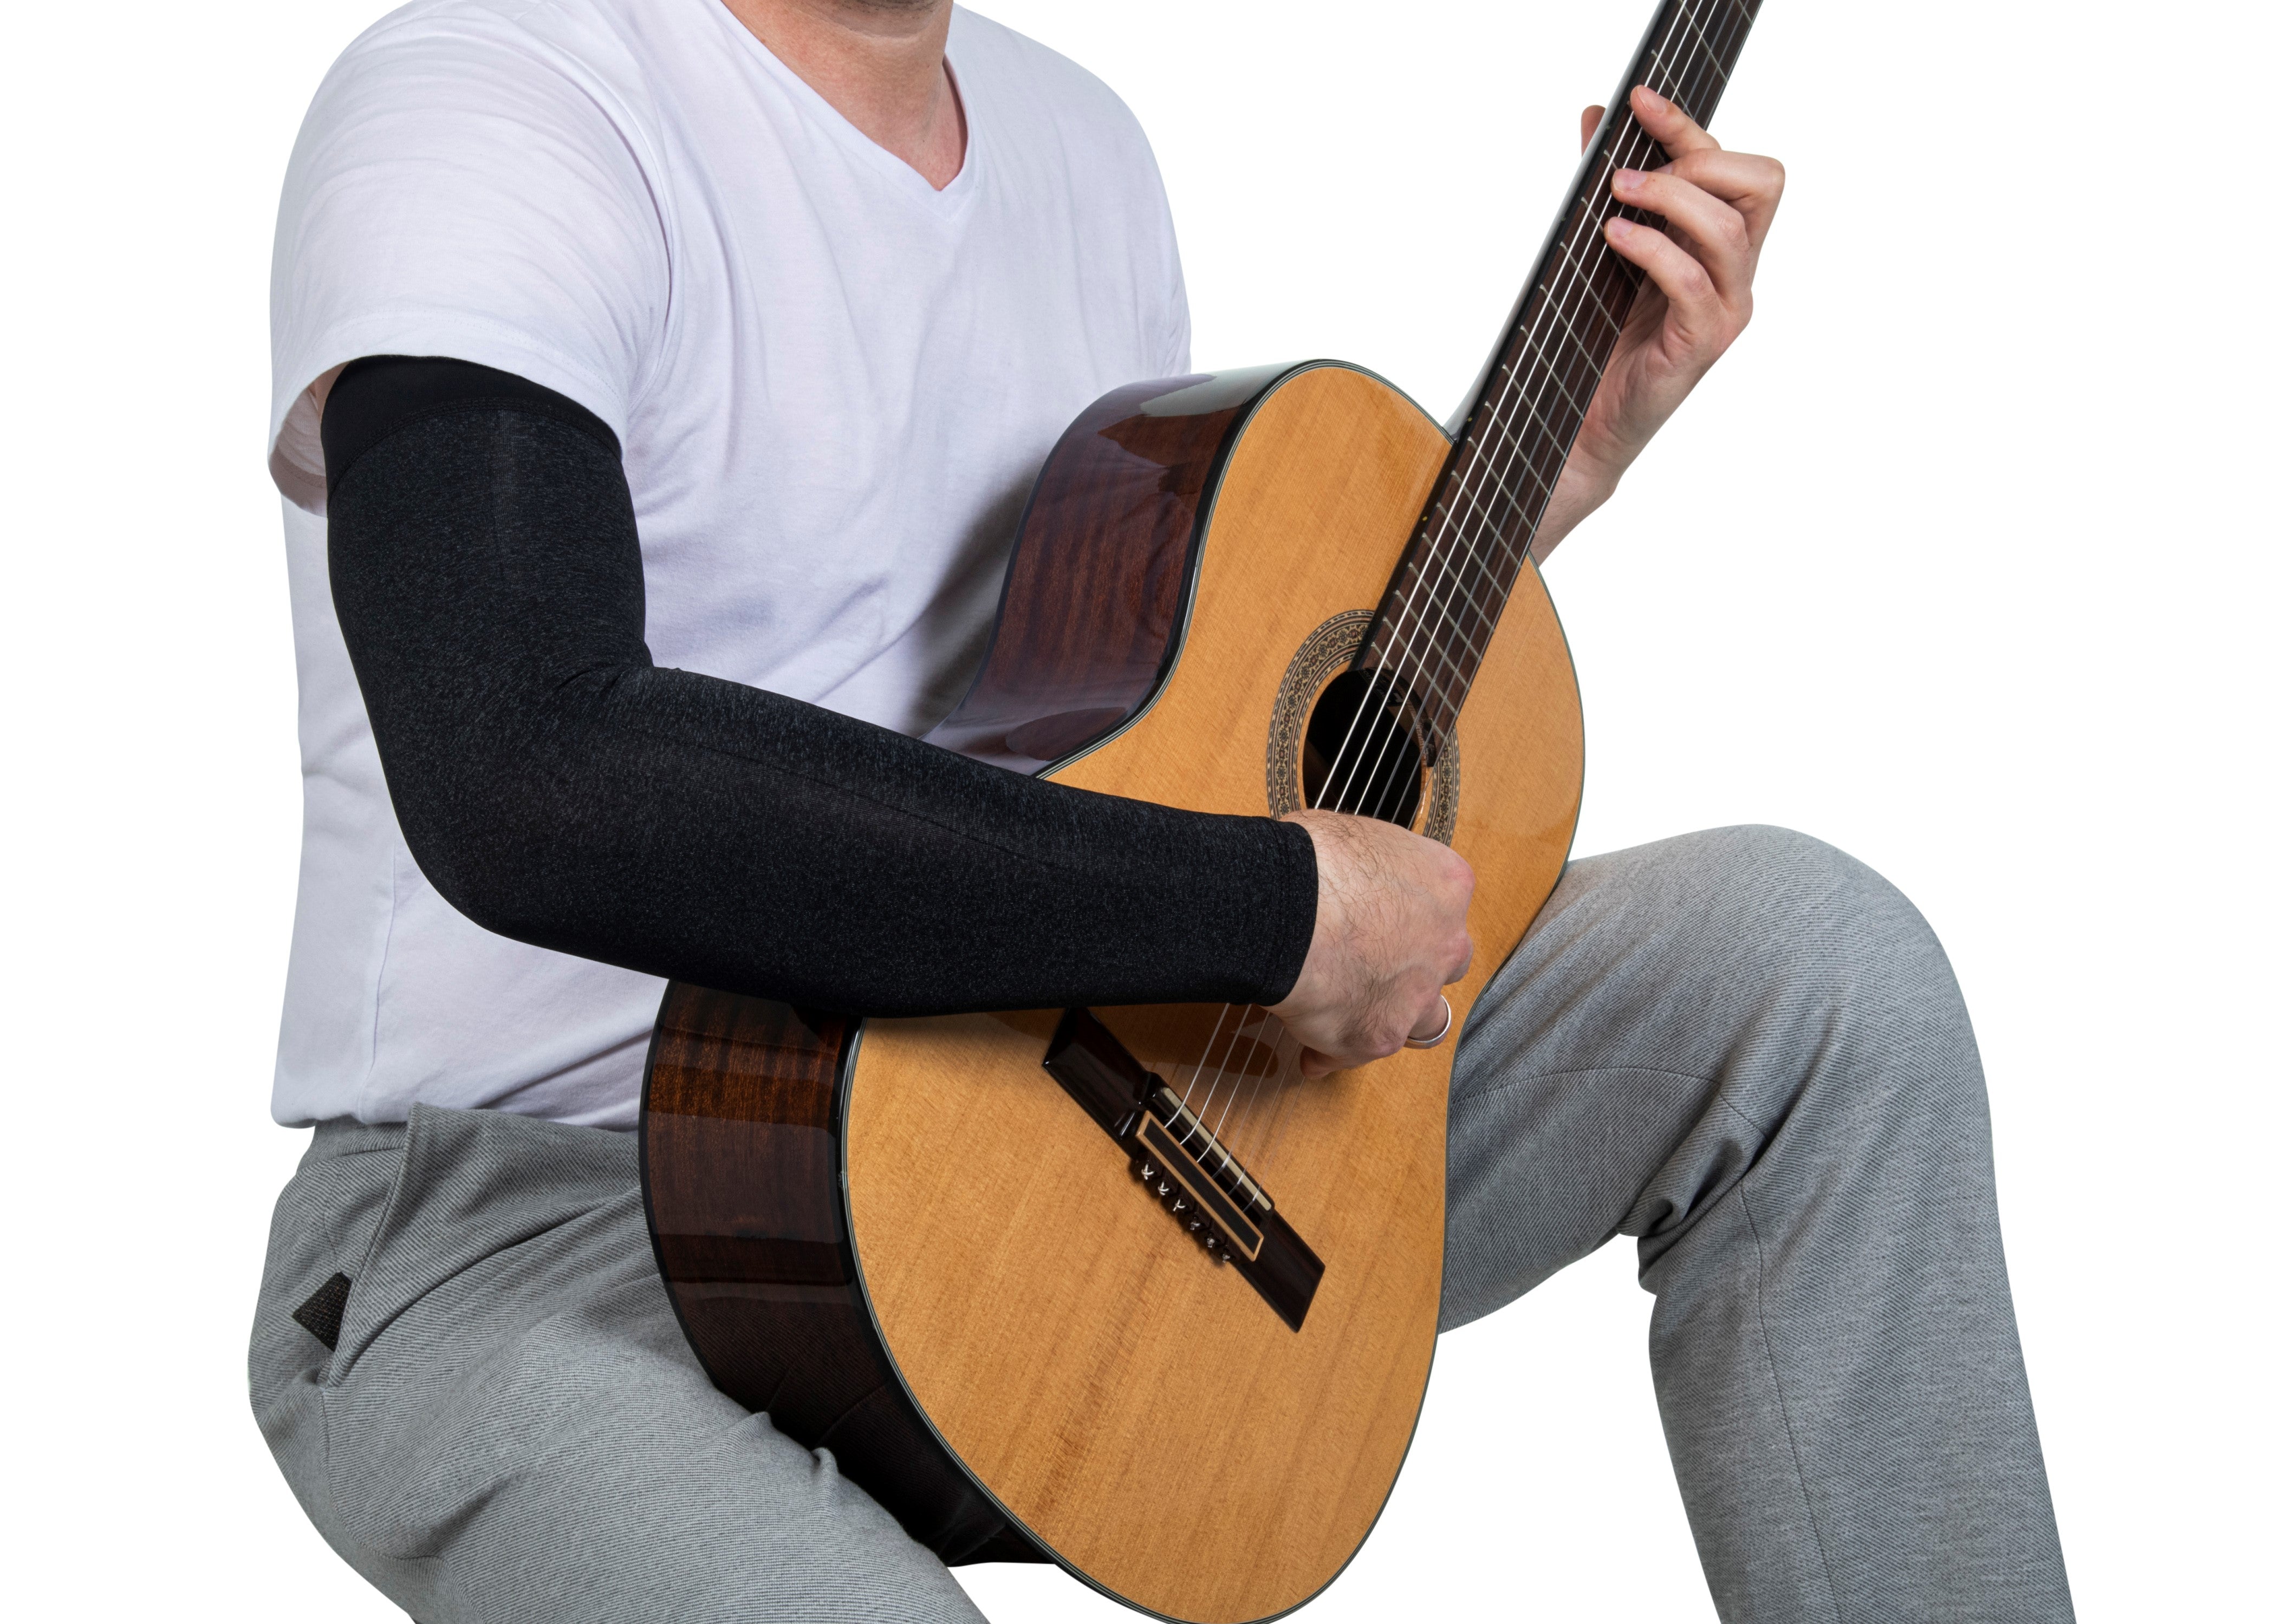 Alba Guitar Beads Long Grey Sleeves - Arm protection for Classical and Flamenco guitarists